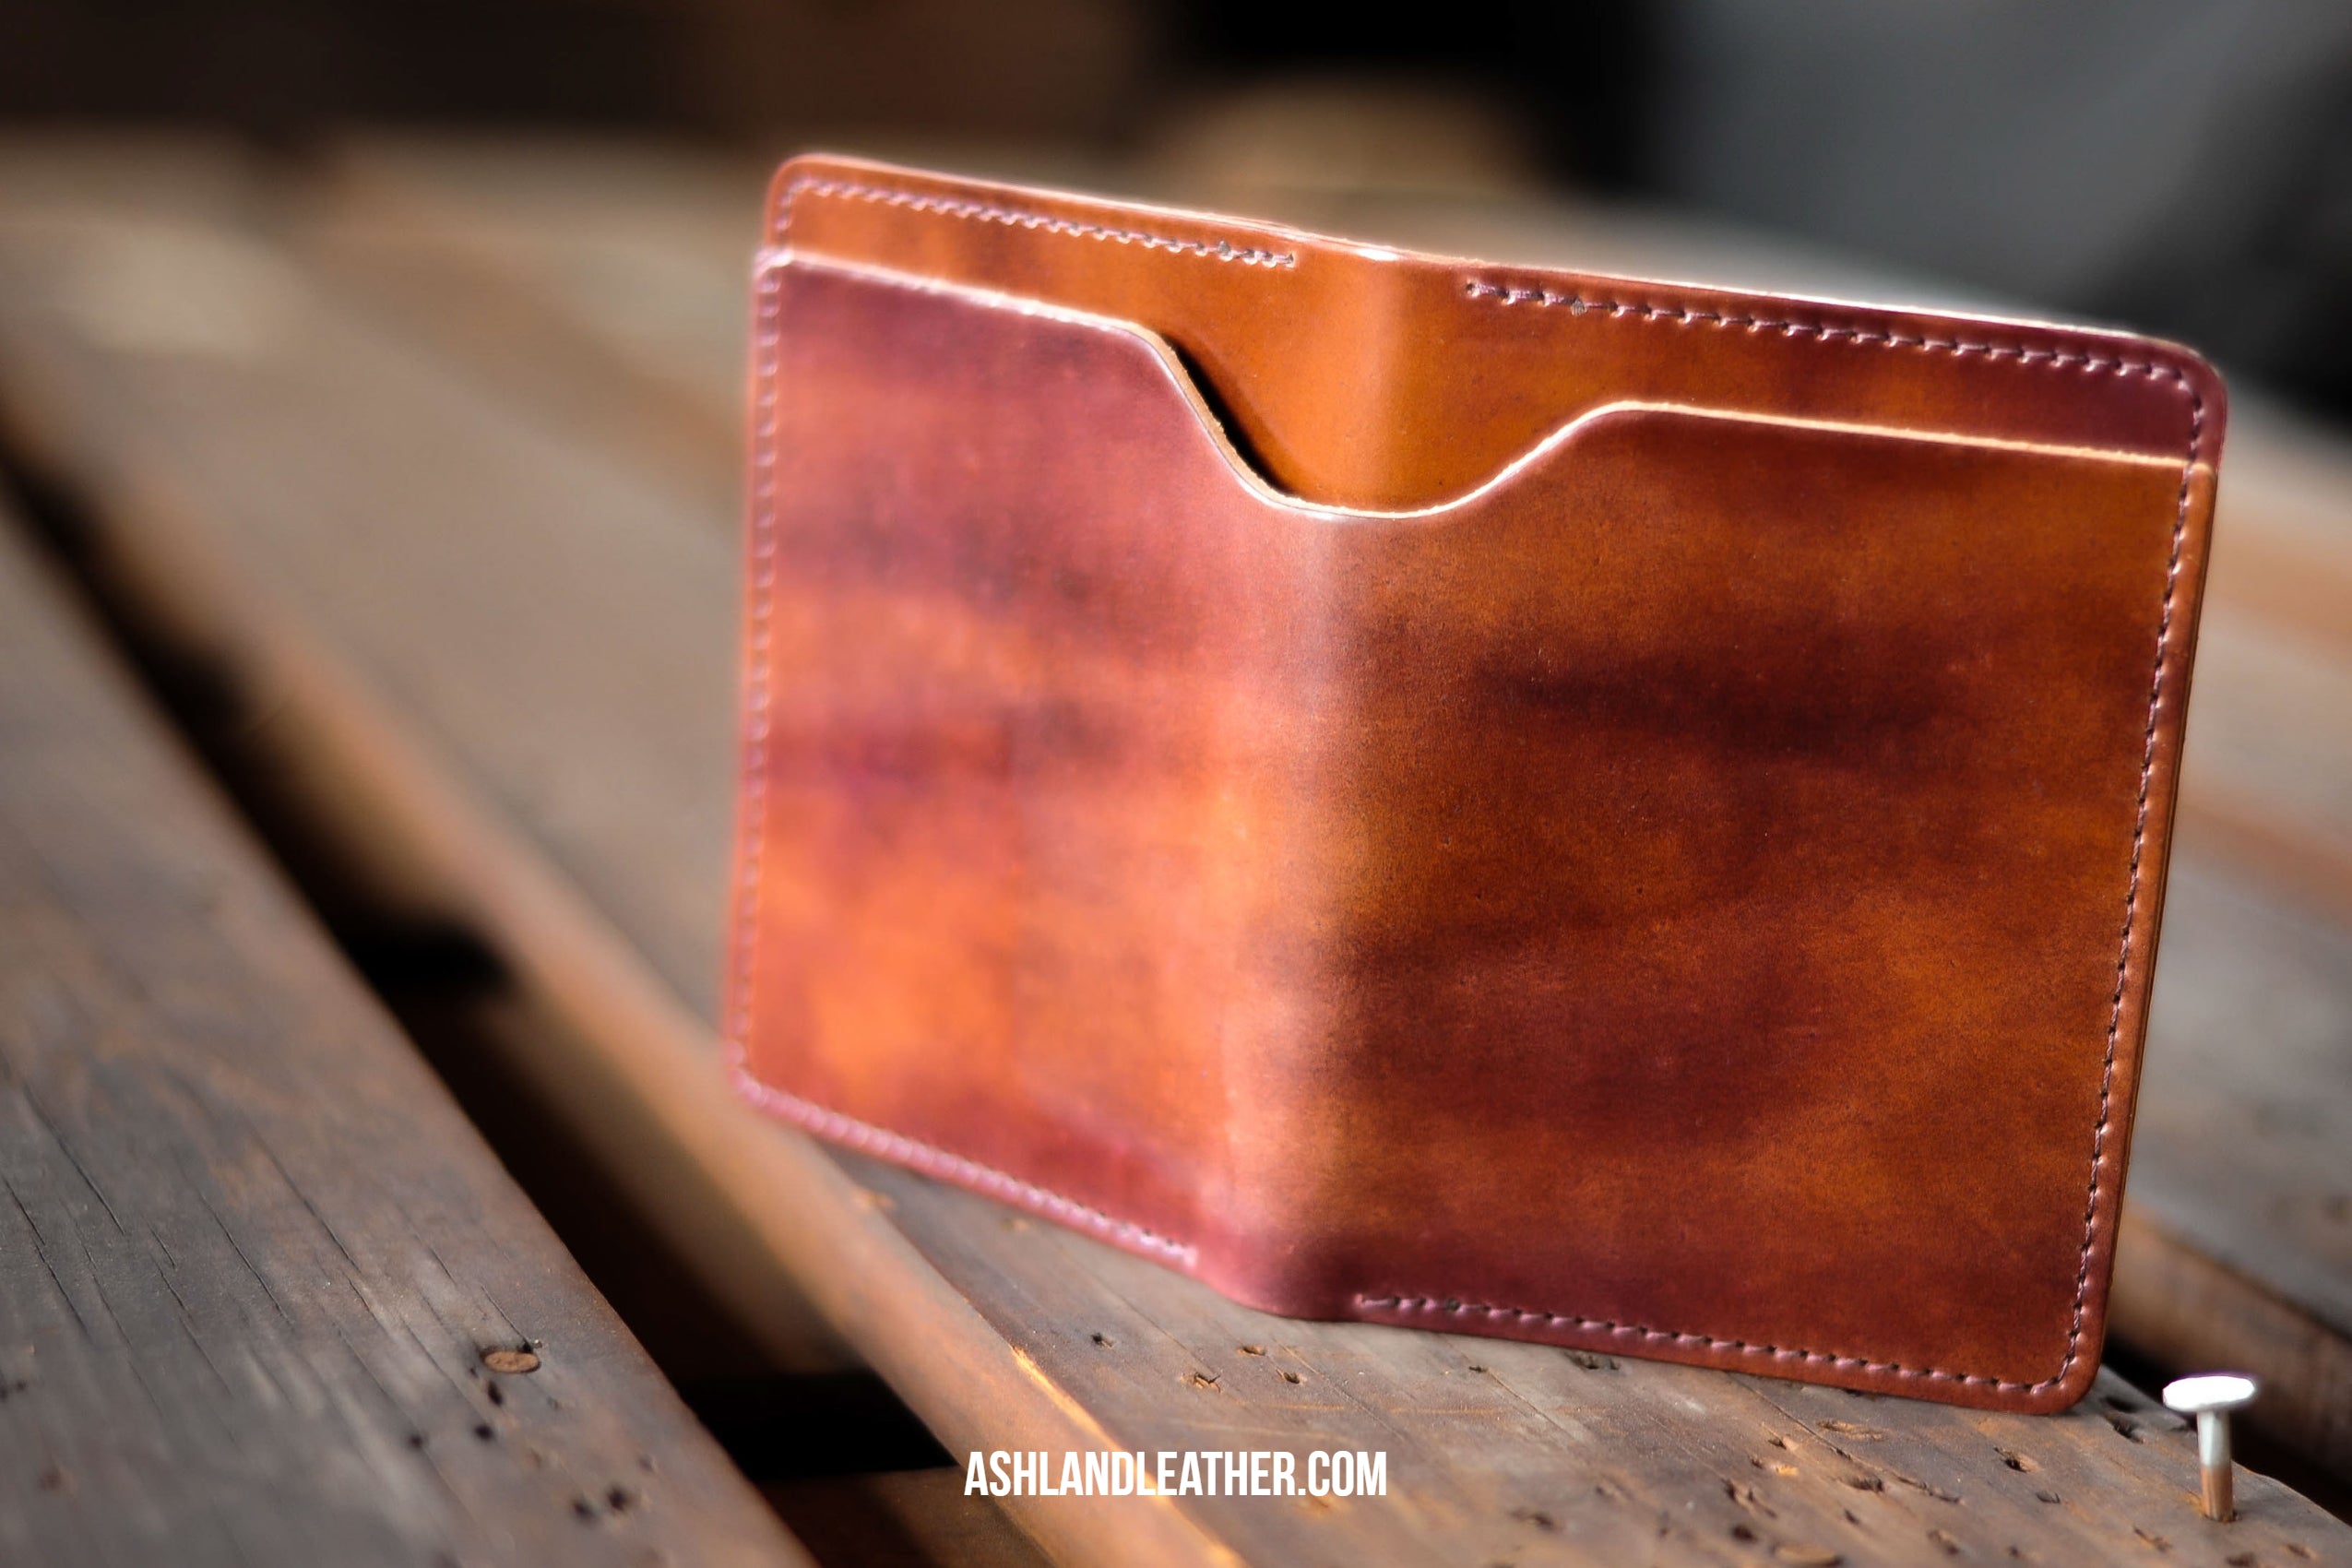 Ashland leather Fat Herbie in color #8 marbled shell cordovan